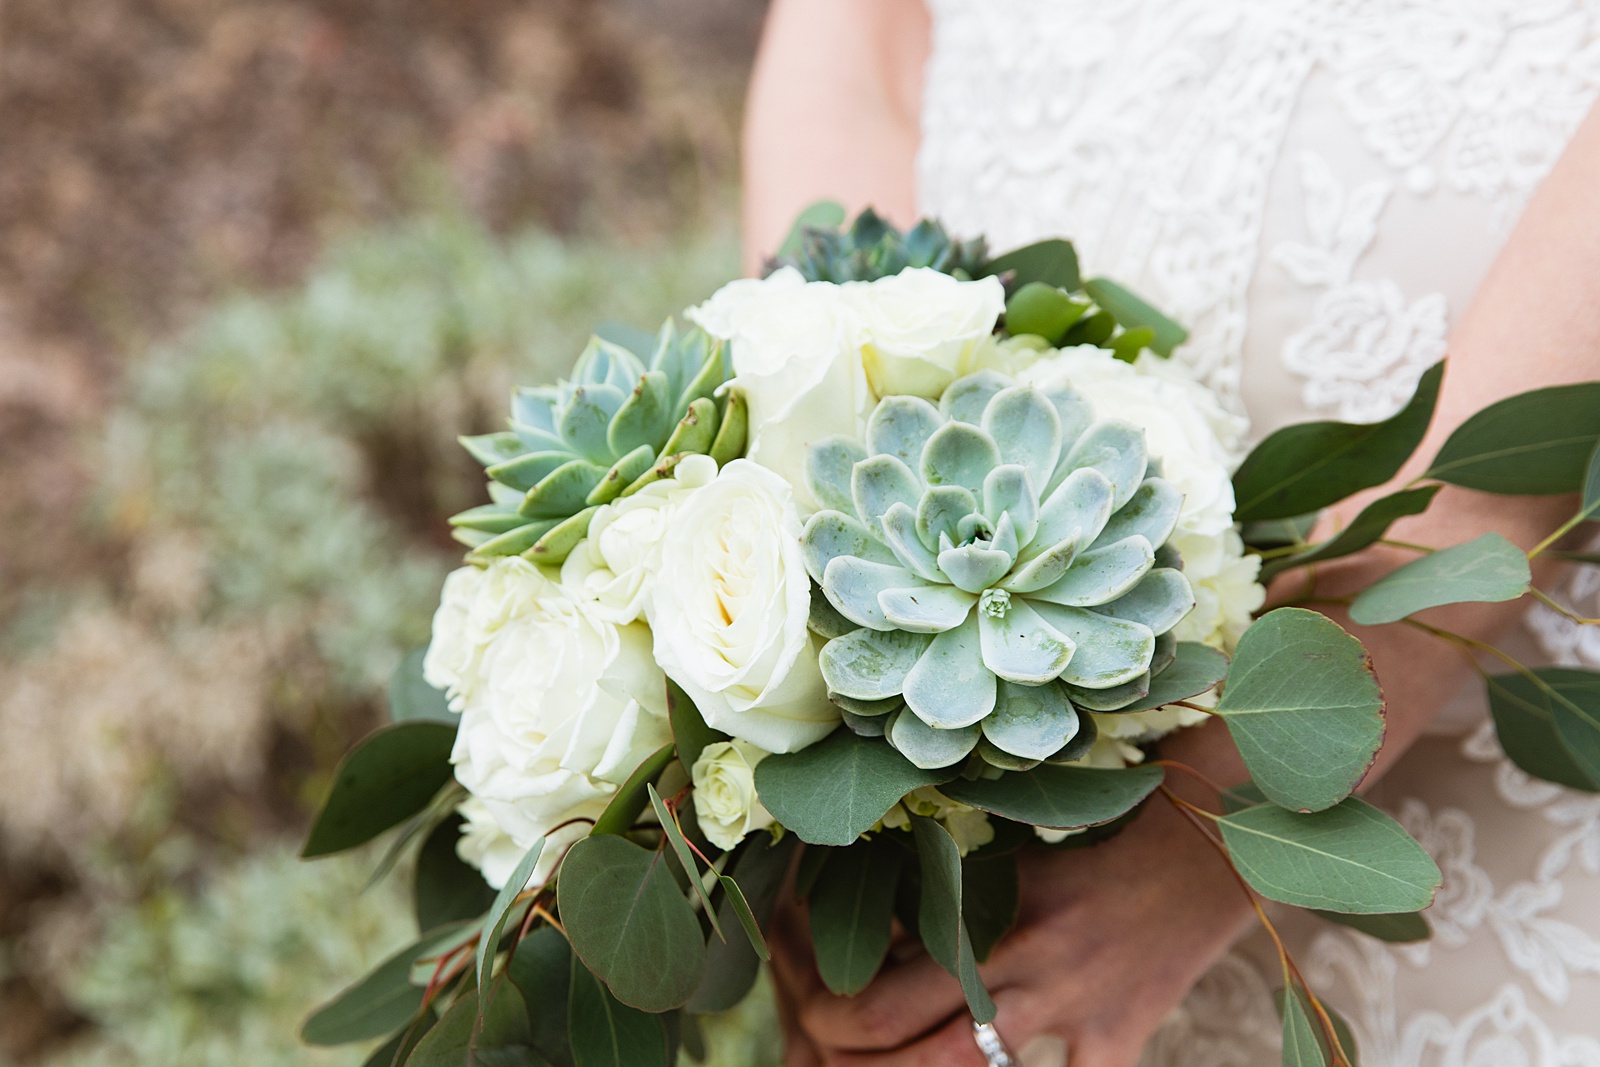 White and green wedding bouquet with white roses, succulents, and eucalyptus by Arizona wedding photographer PMA Photography.